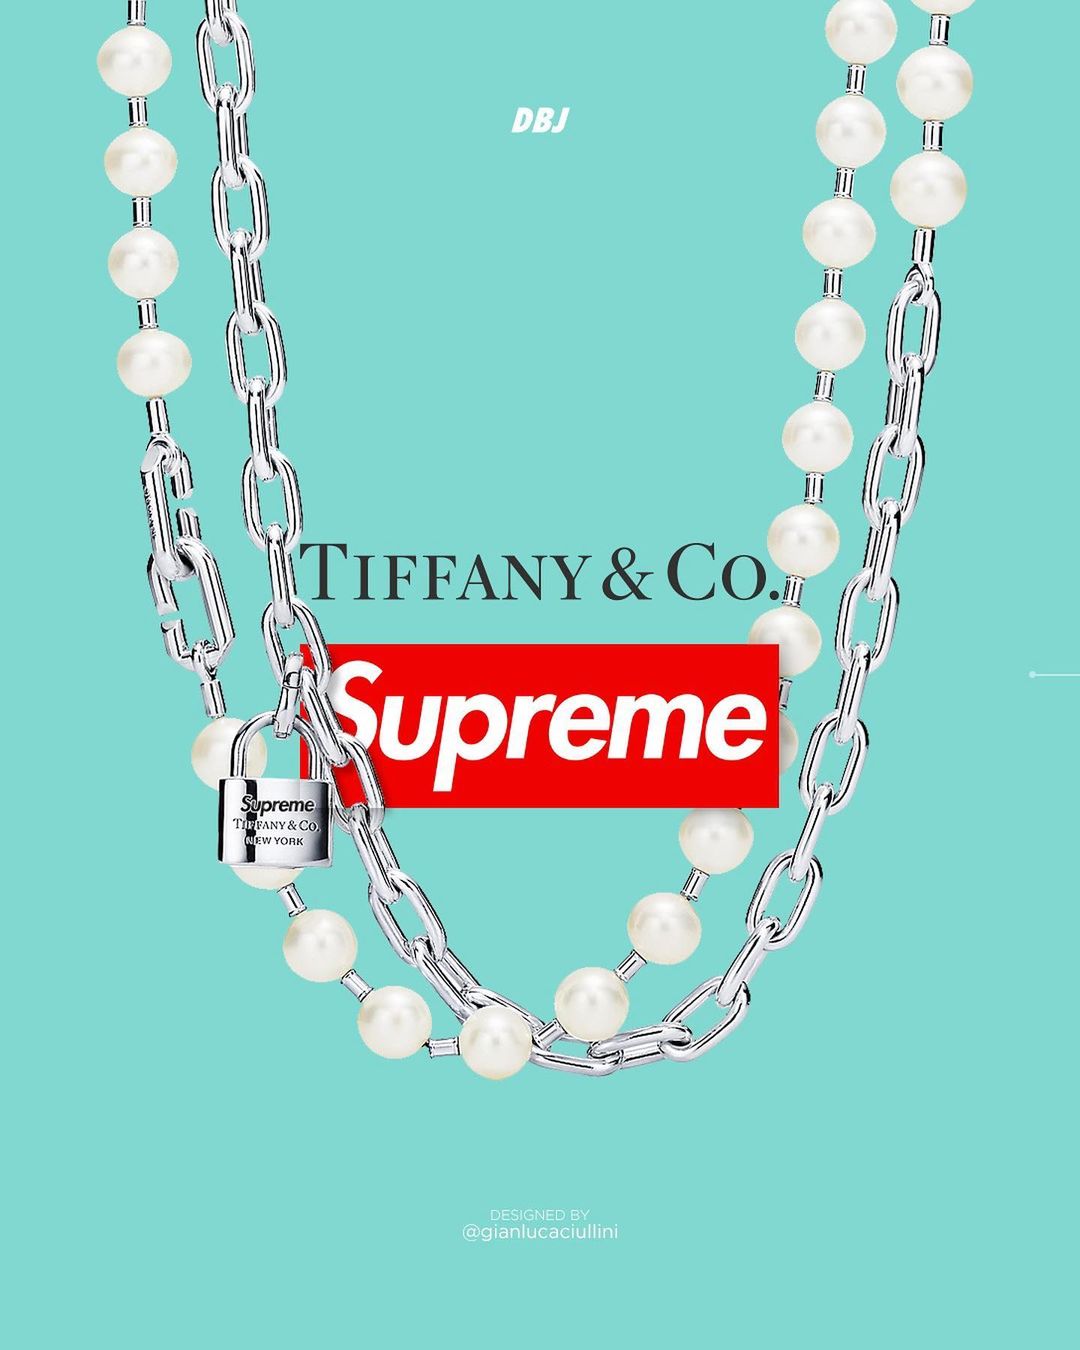 supreme-tiffany-and-co-21aw-21fw-collaboration